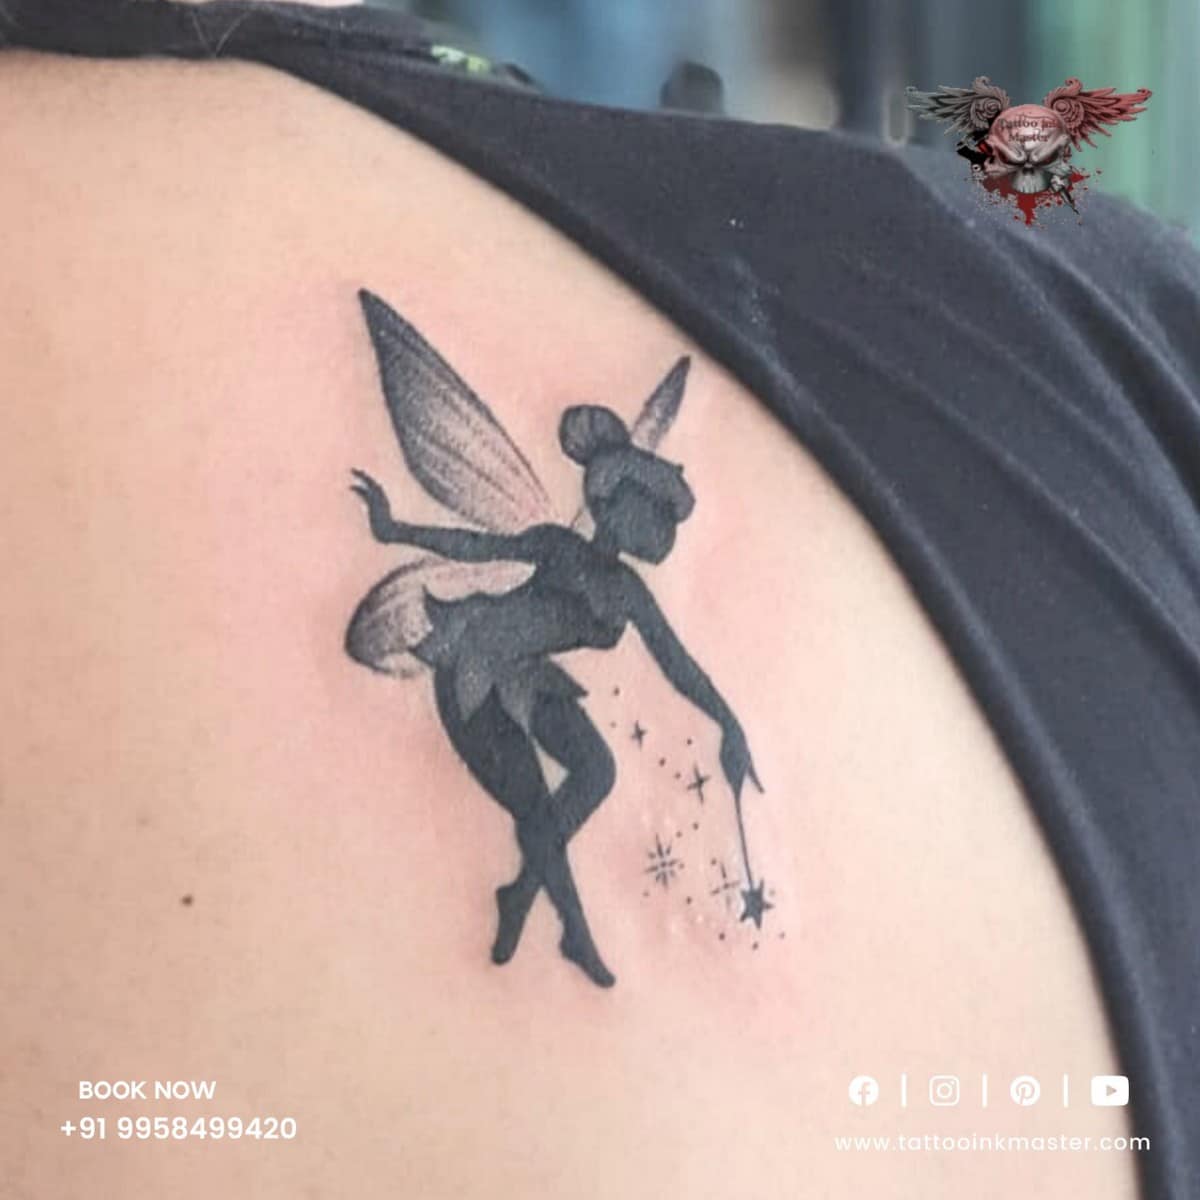 You are currently viewing Cute Looking Angel Tattoo in Black